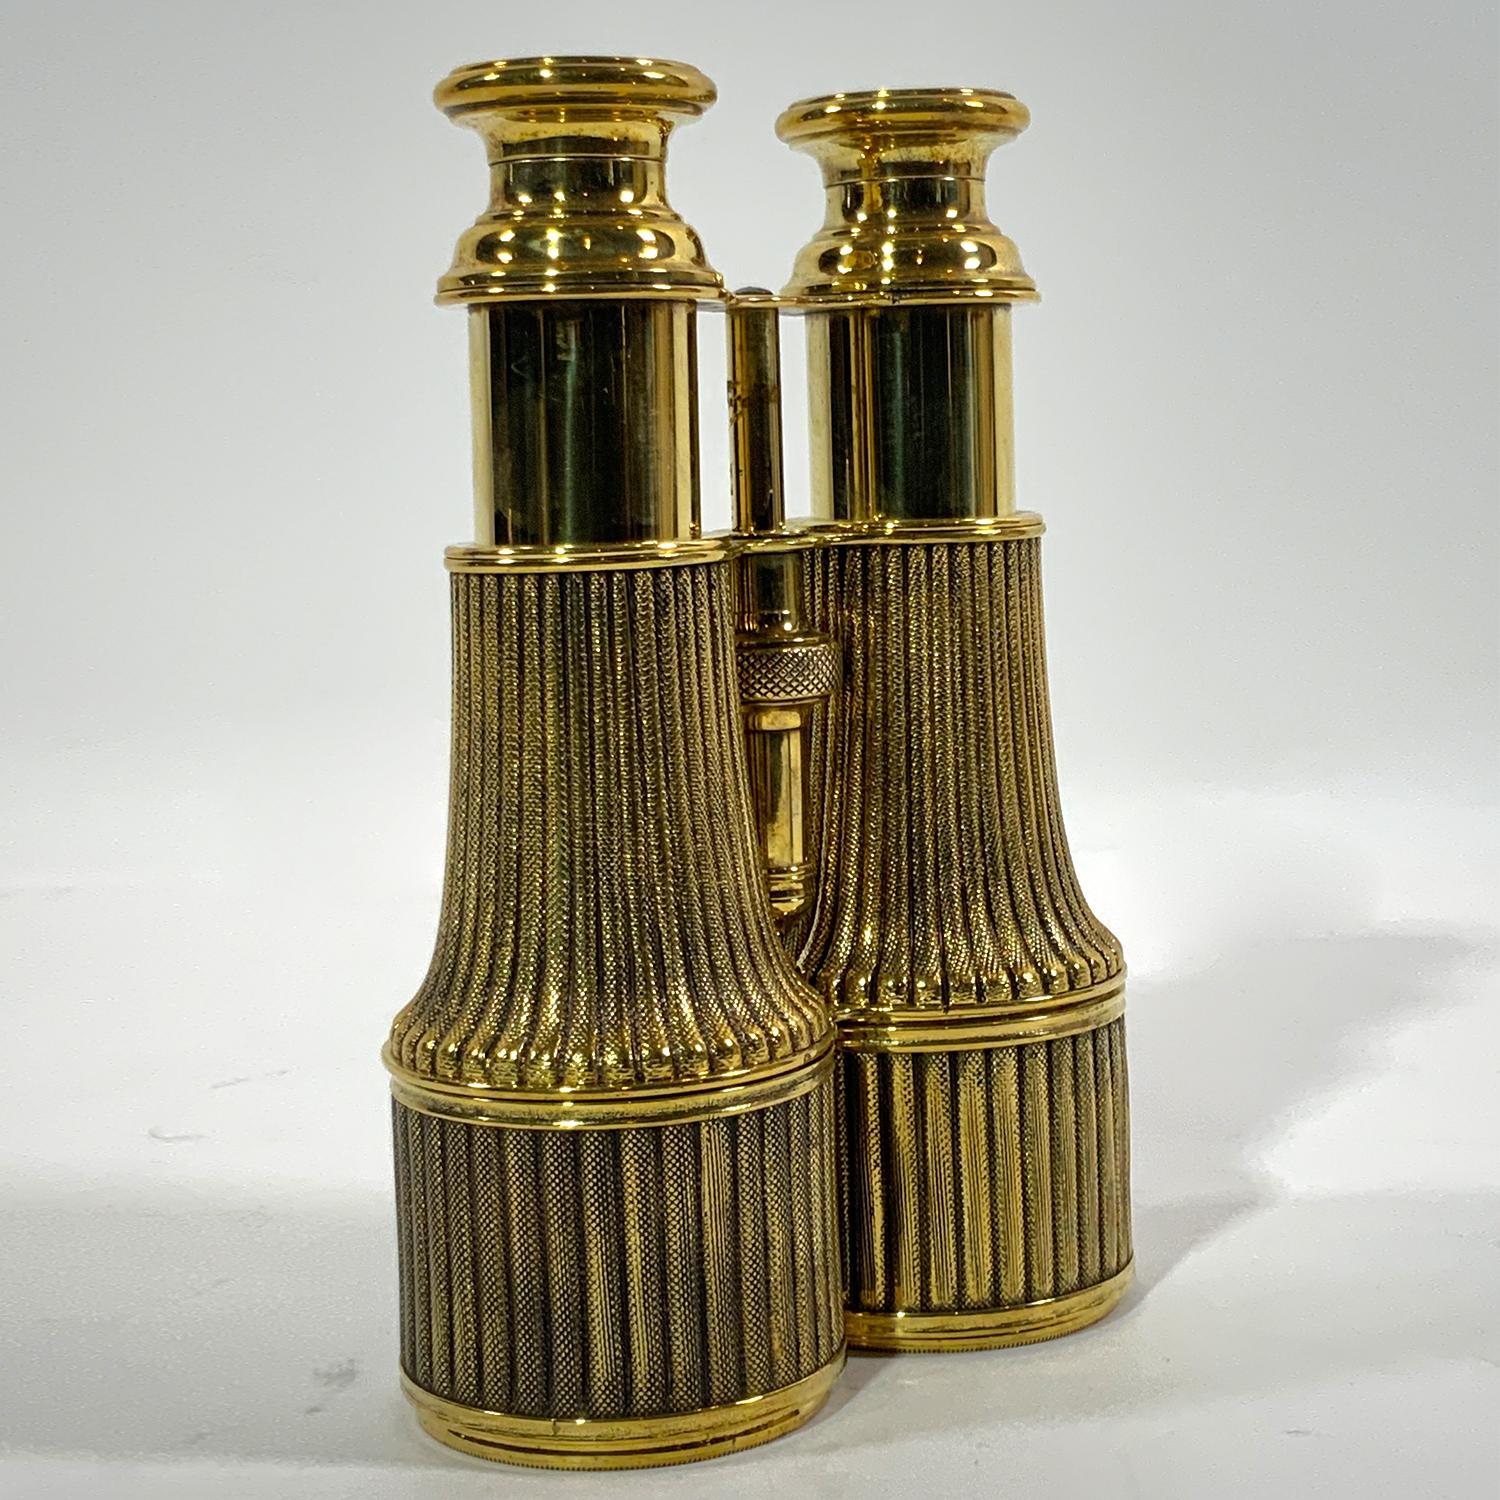 Exceptional pair of French yachting binoculars. Polished and lacquered gentleman's binoculars with geared focal tubes. Interesting design that resembles rope. Clean and clear. Wonderfully restored. Circa 1890.